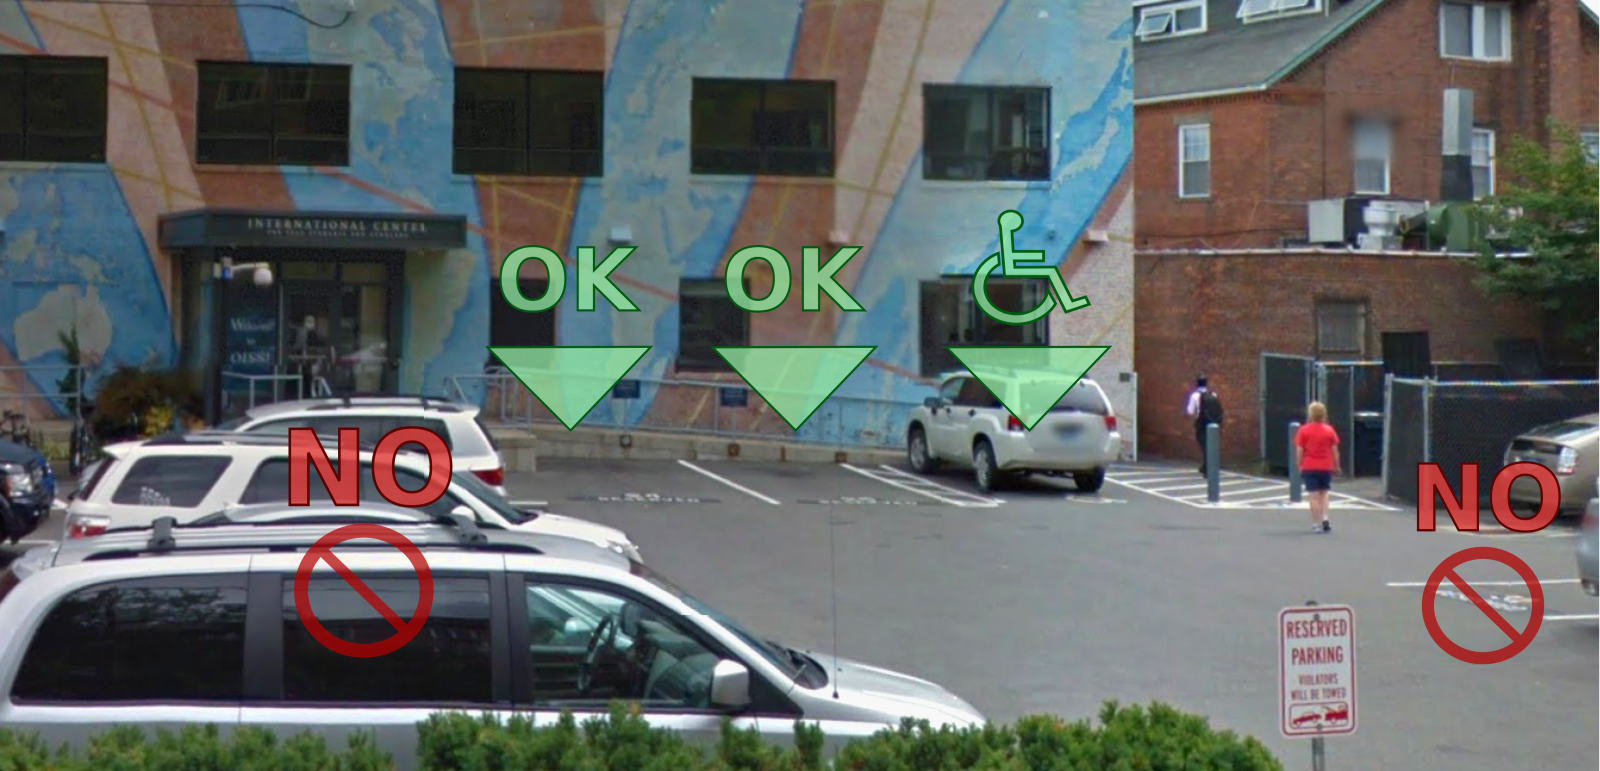 Places you can park and cant park at OISS